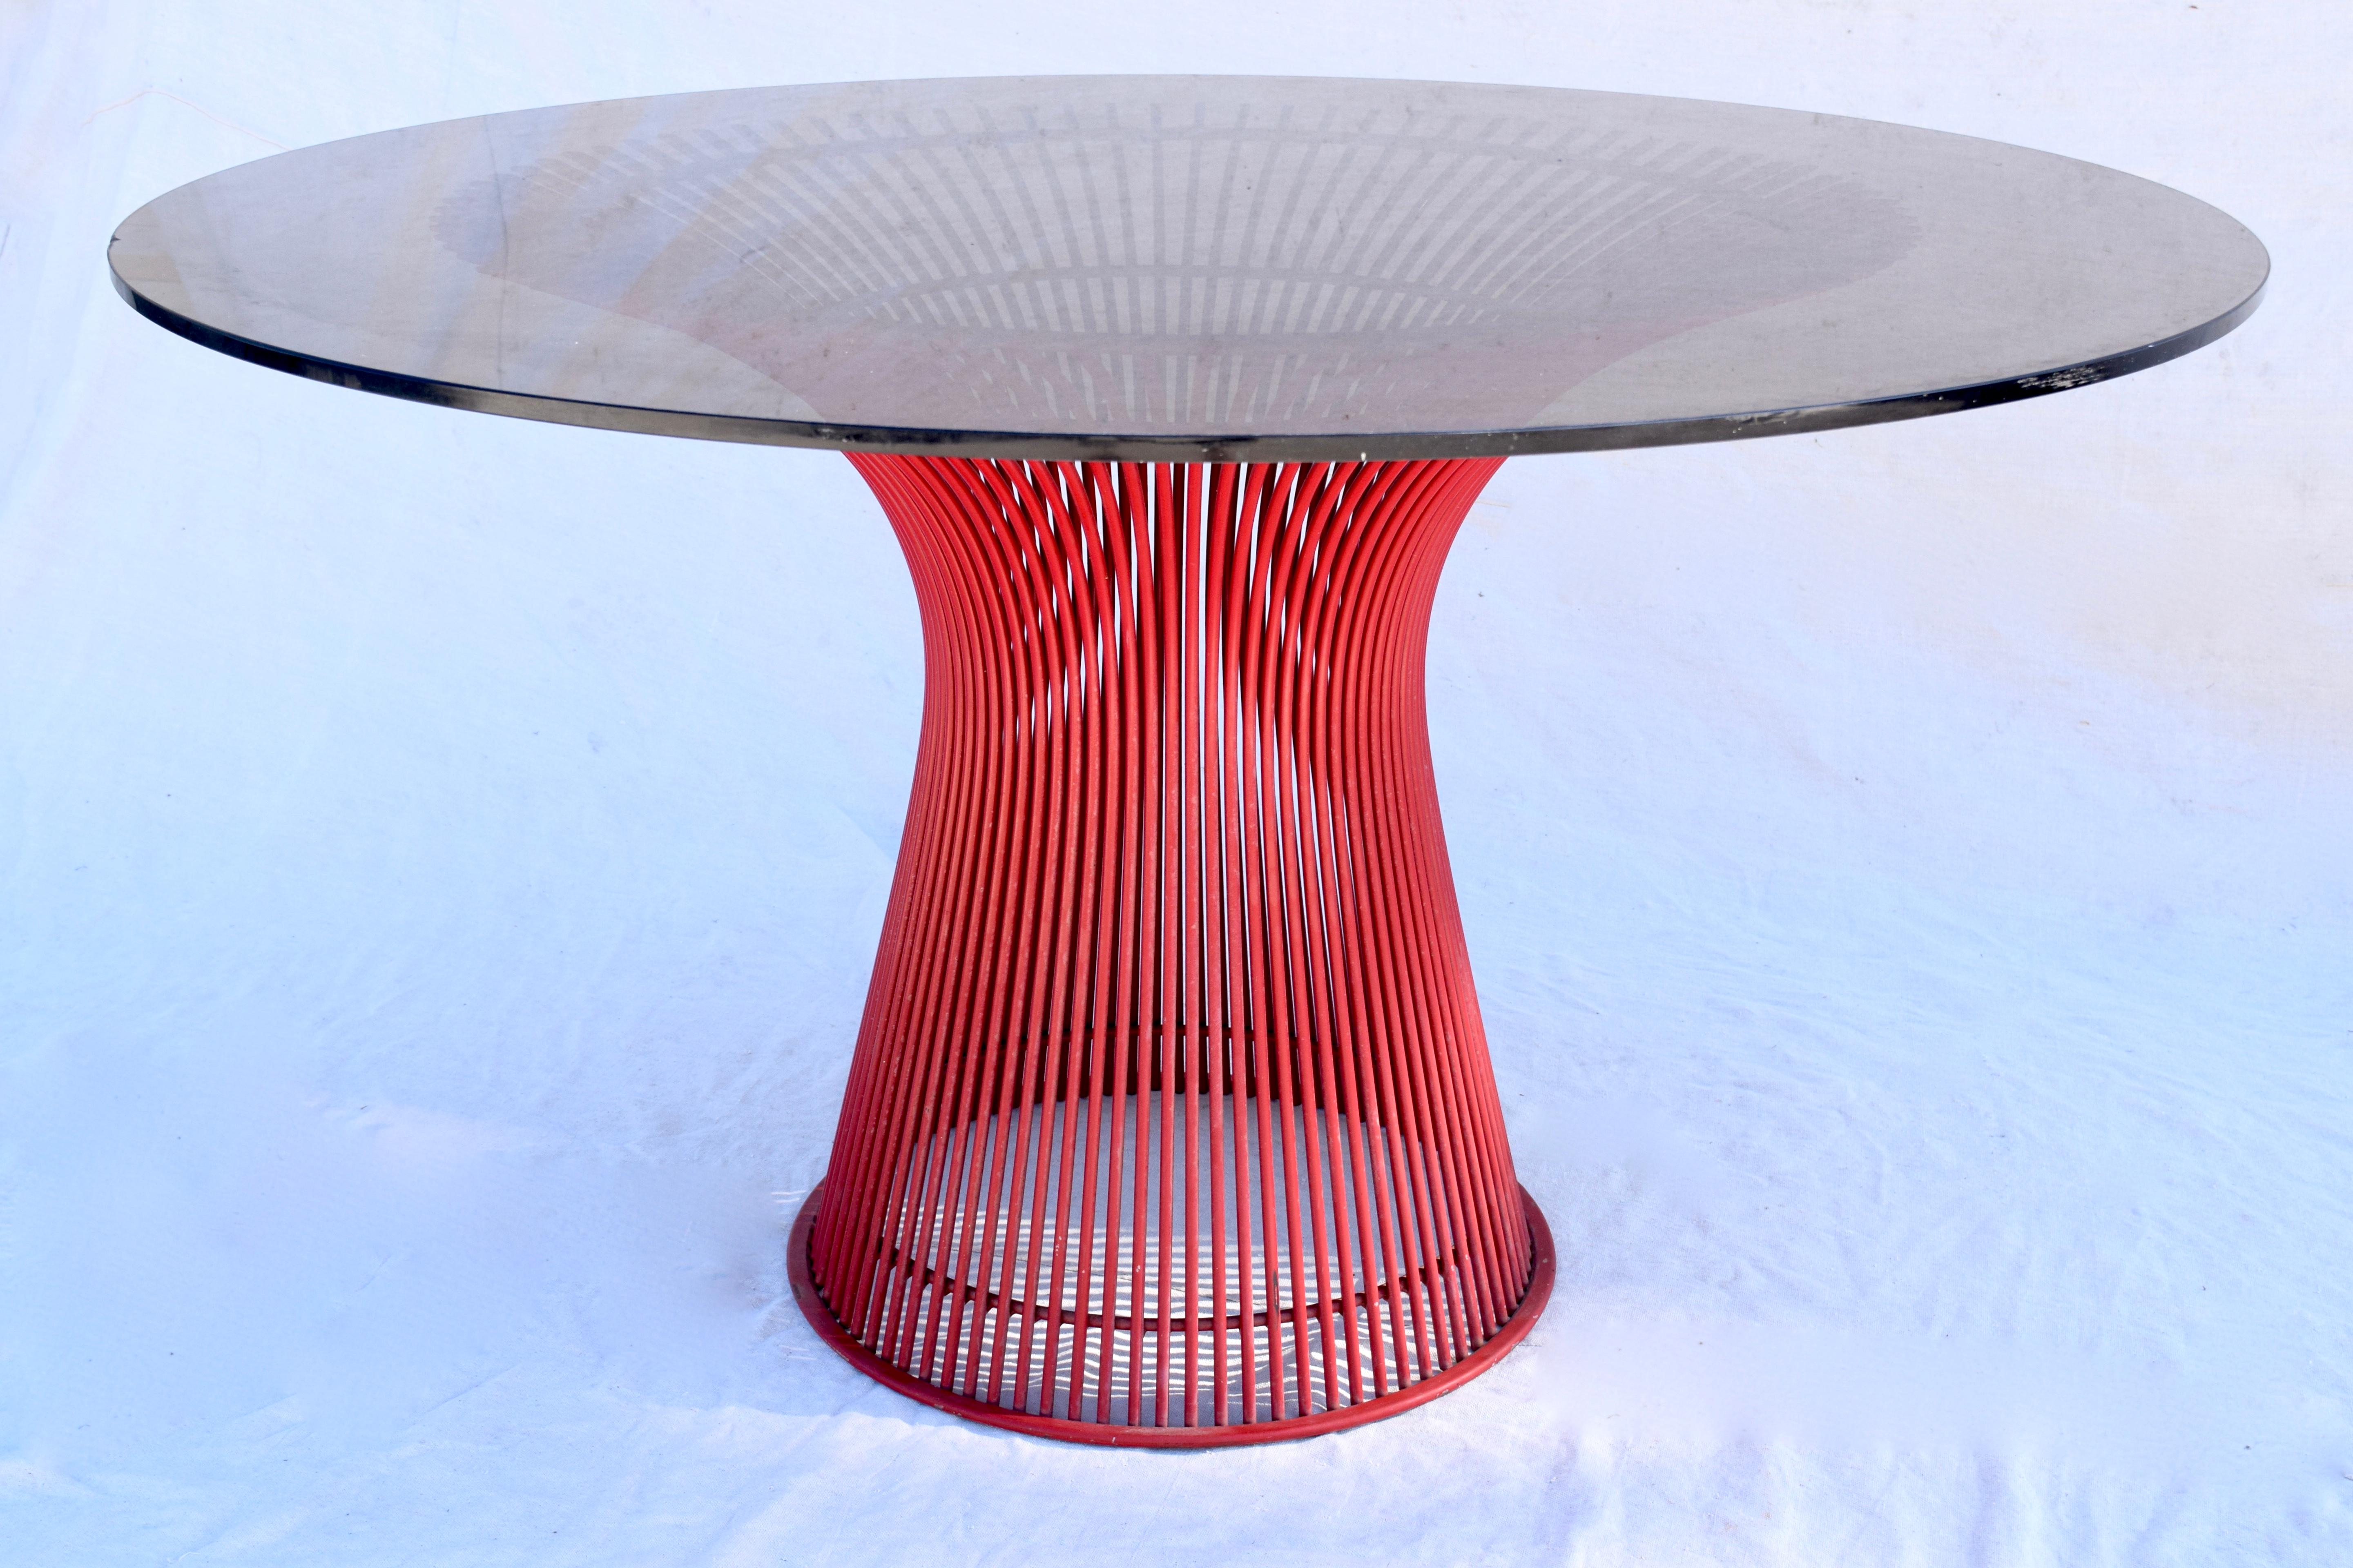 Warren Platner Knoll dining table in red enamel and steel base custom ordered by the original owner in the late 1970s. Unusual original chocolate brown glass top.